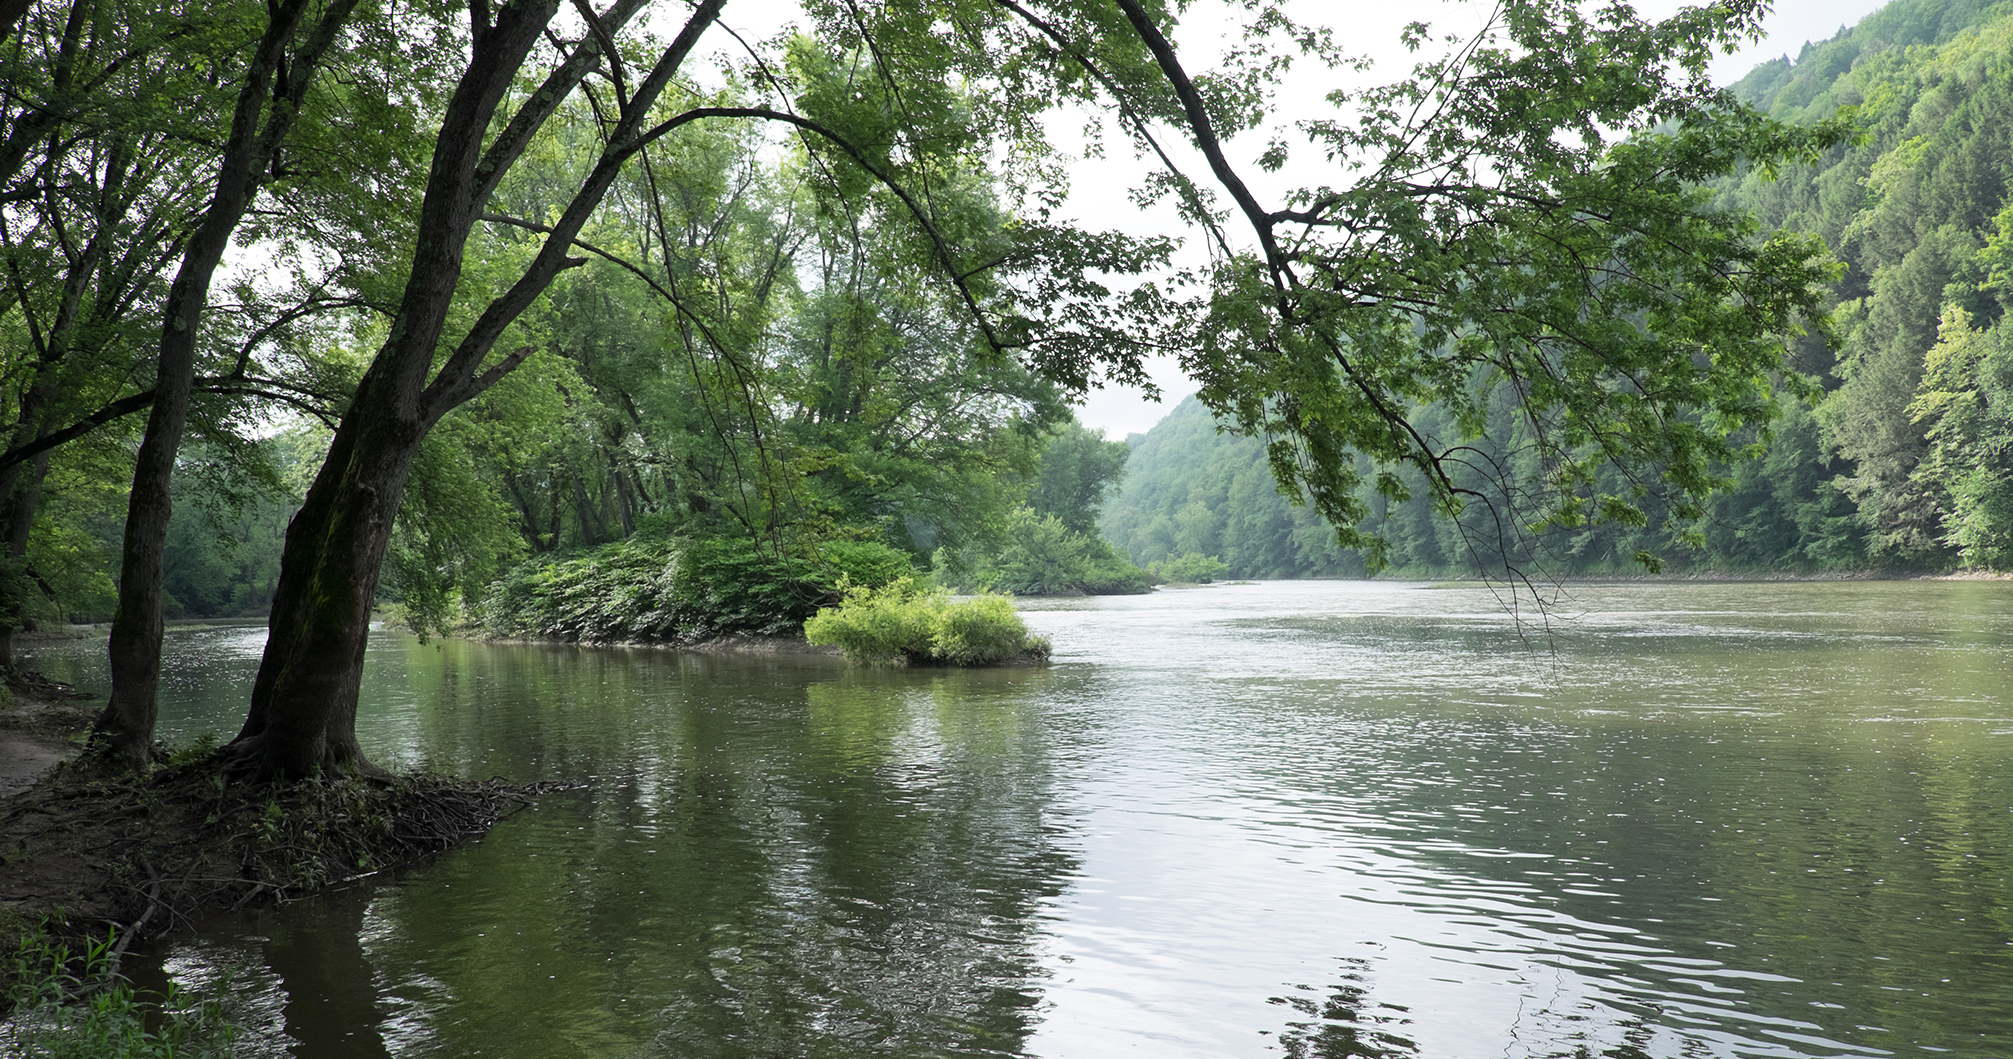 Susquehanna River lined by trees flows near Priesthood Restoration Site.